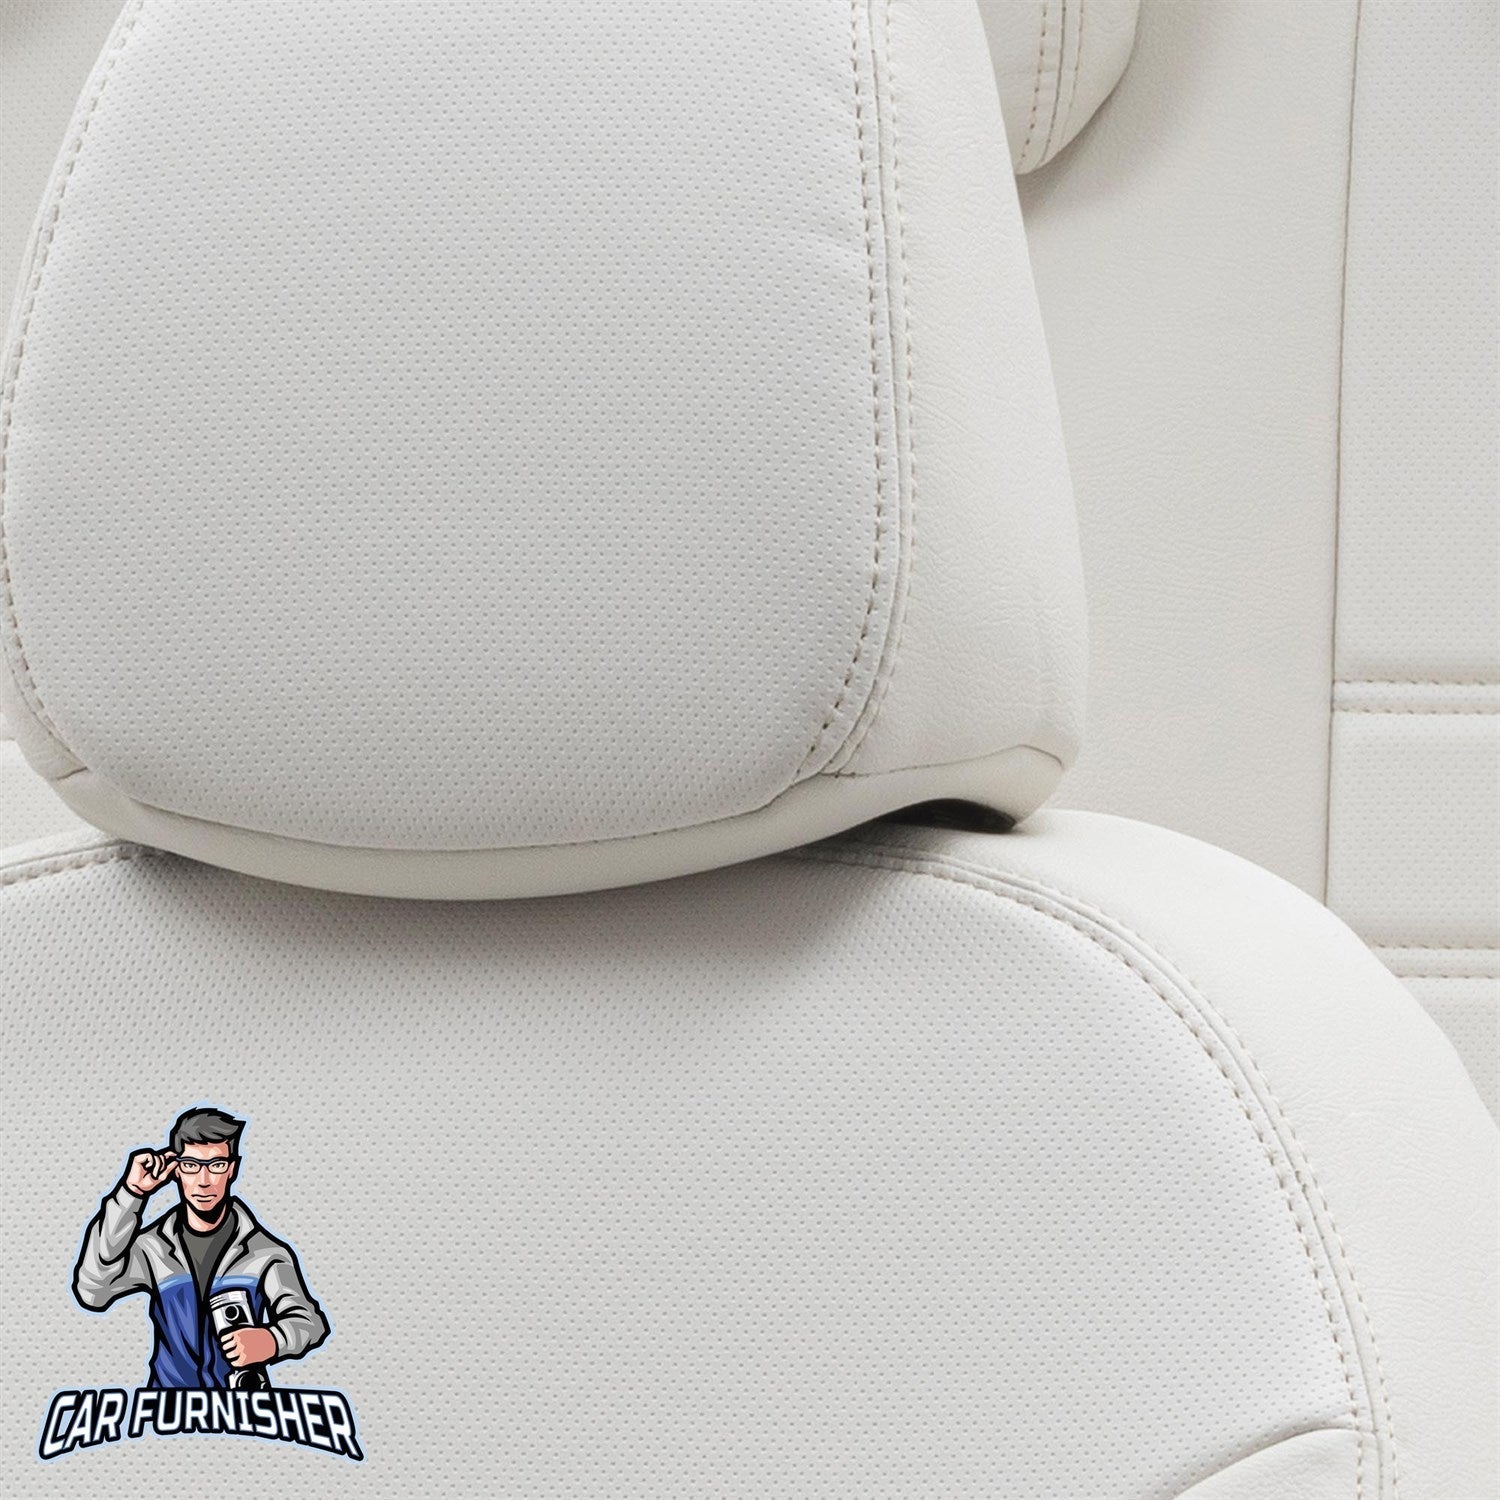 Mazda CX5 Seat Cover Istanbul Leather Design Ivory Leather